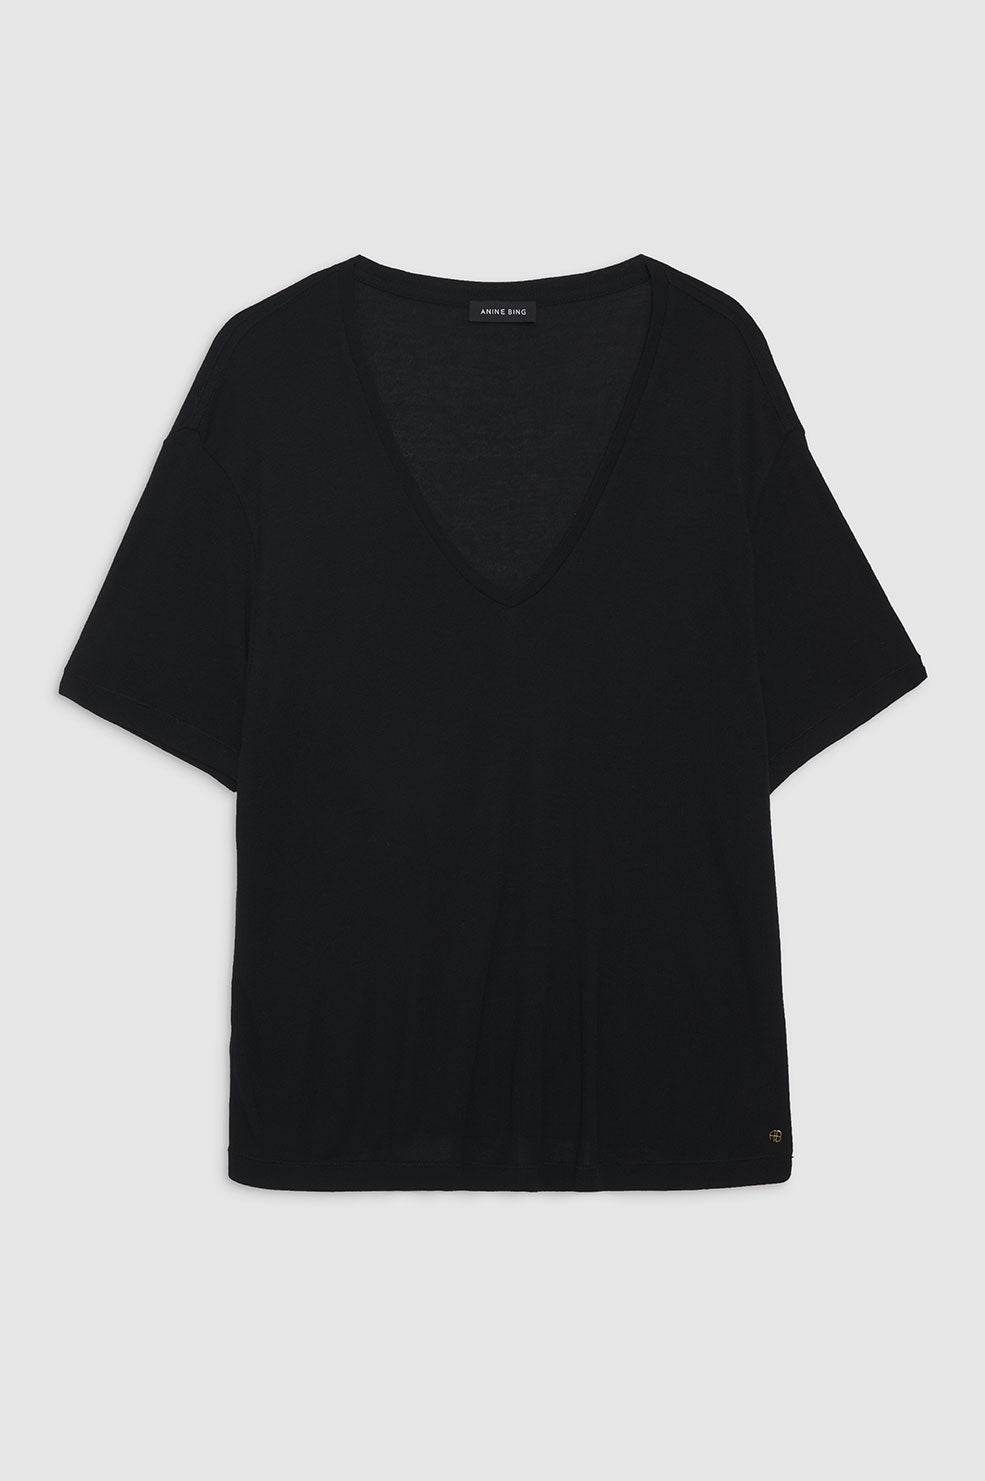 ANINE BING Vale Tee - Black Cashmere Blend - Front View